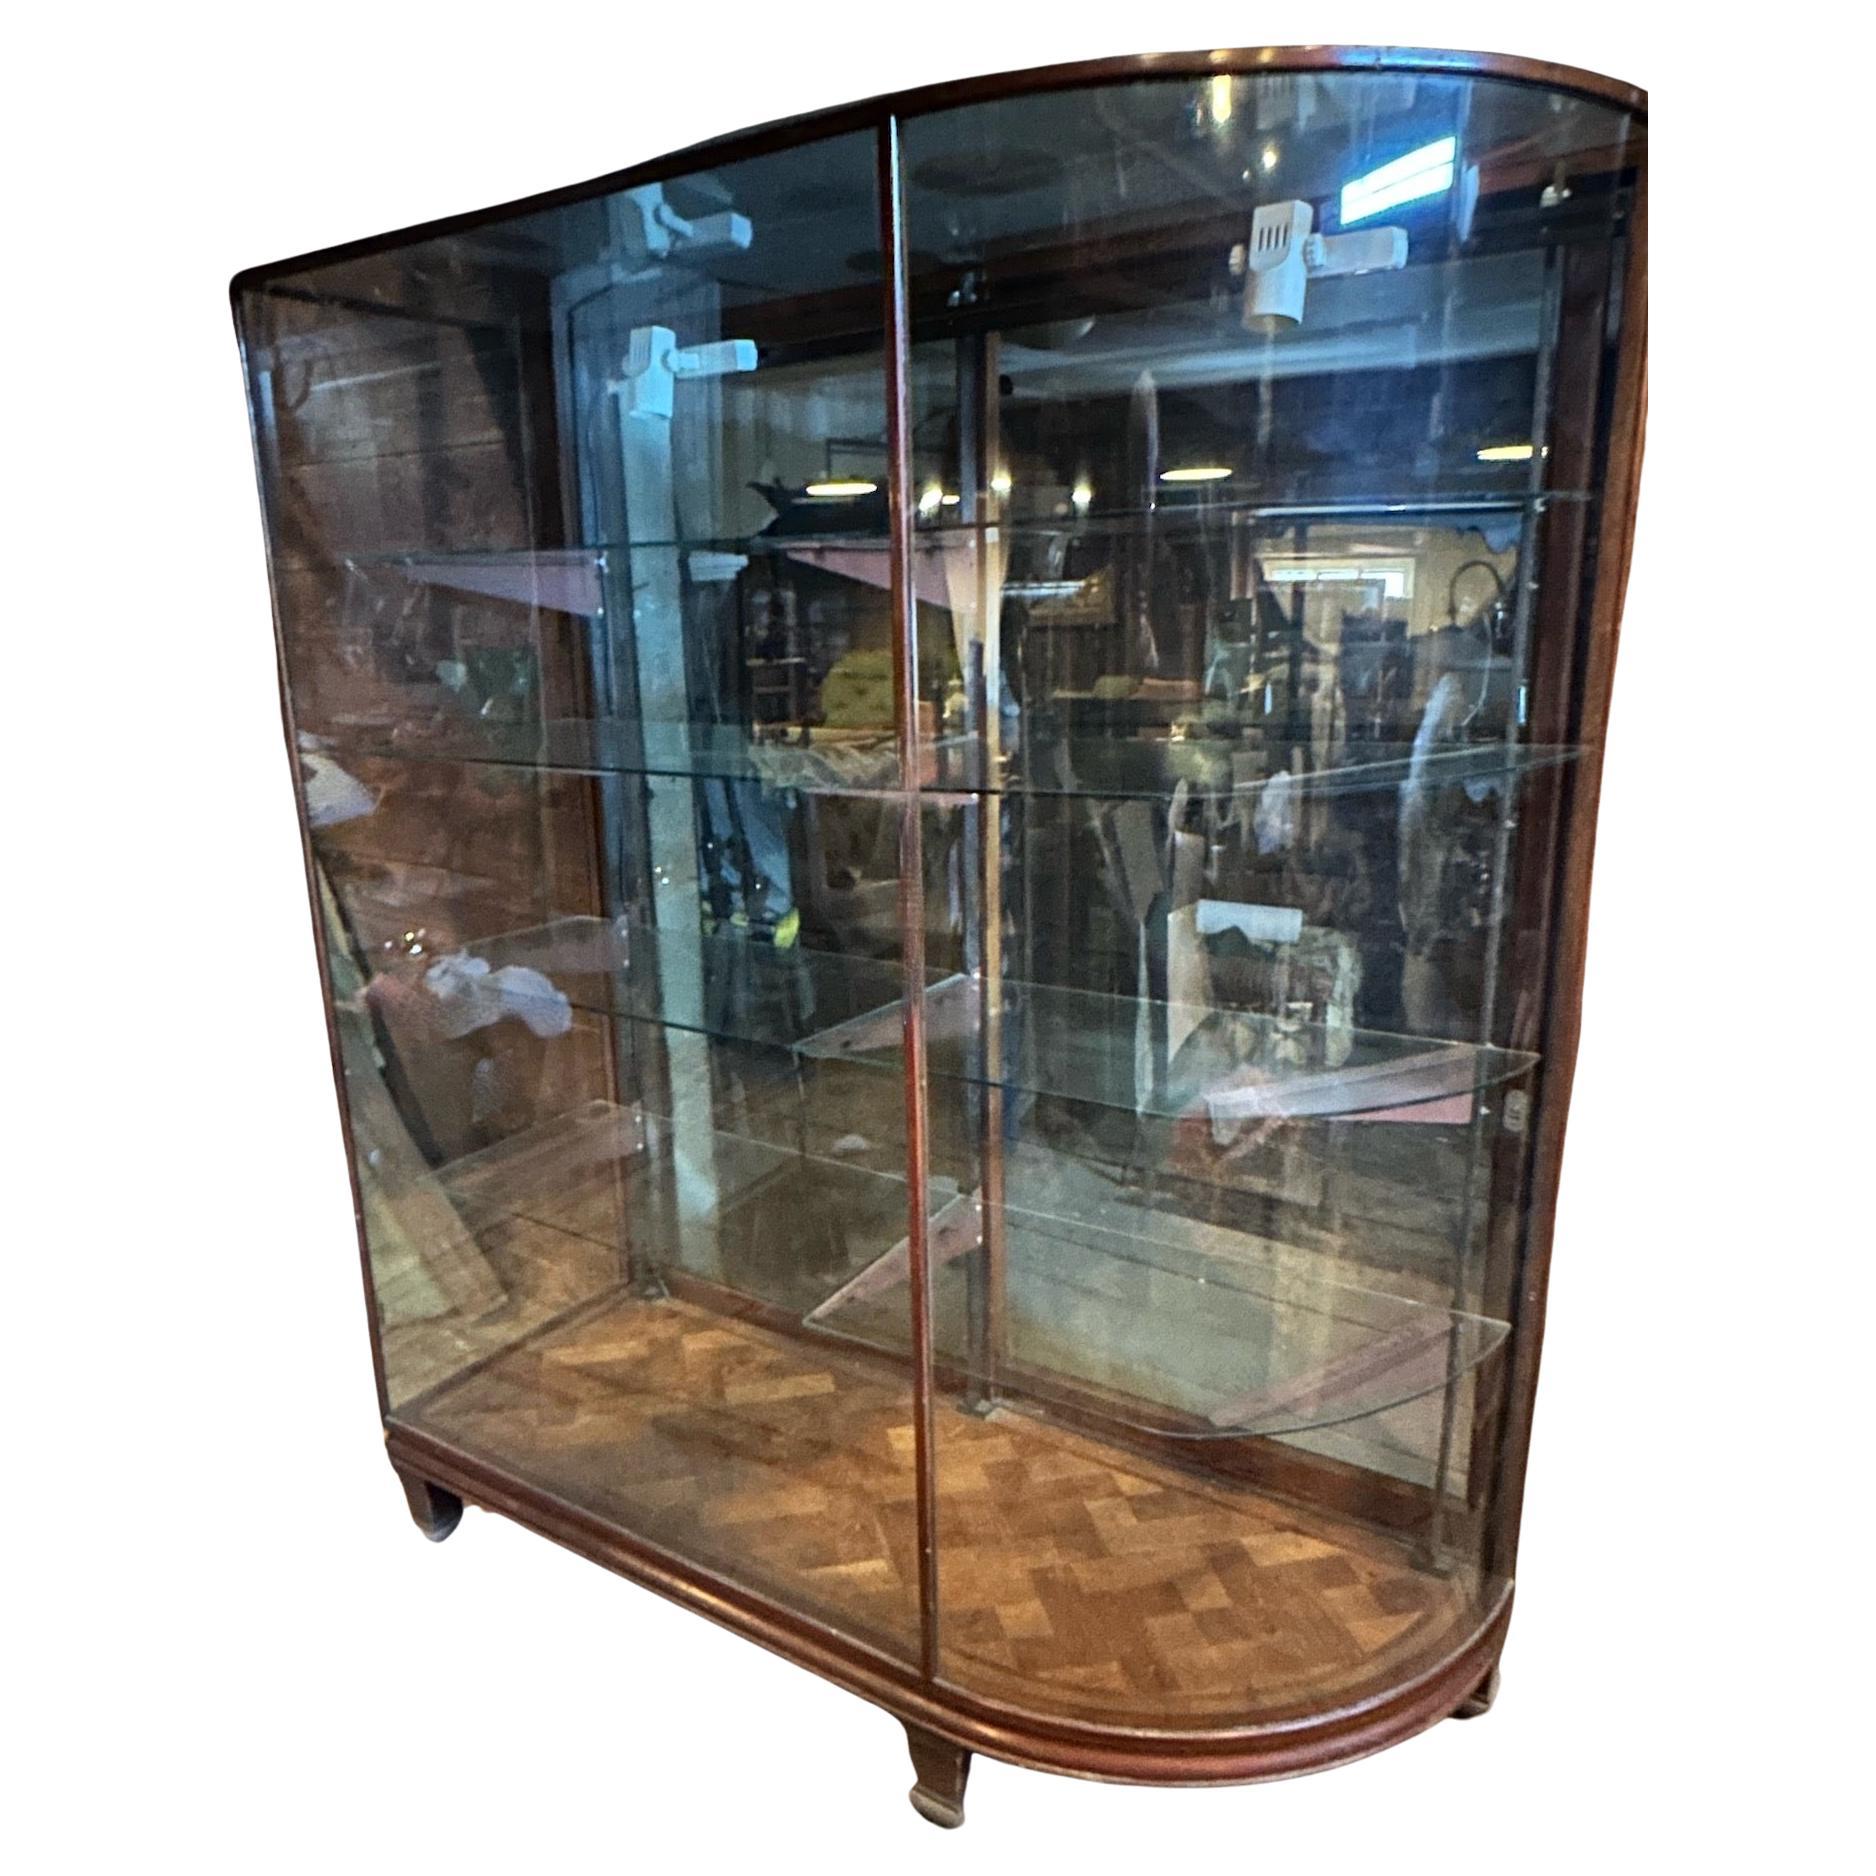 Early 20th Century Pair 19th C Bow Glass Sided Display Cabinets from an Upscale Boston Fashion Shop